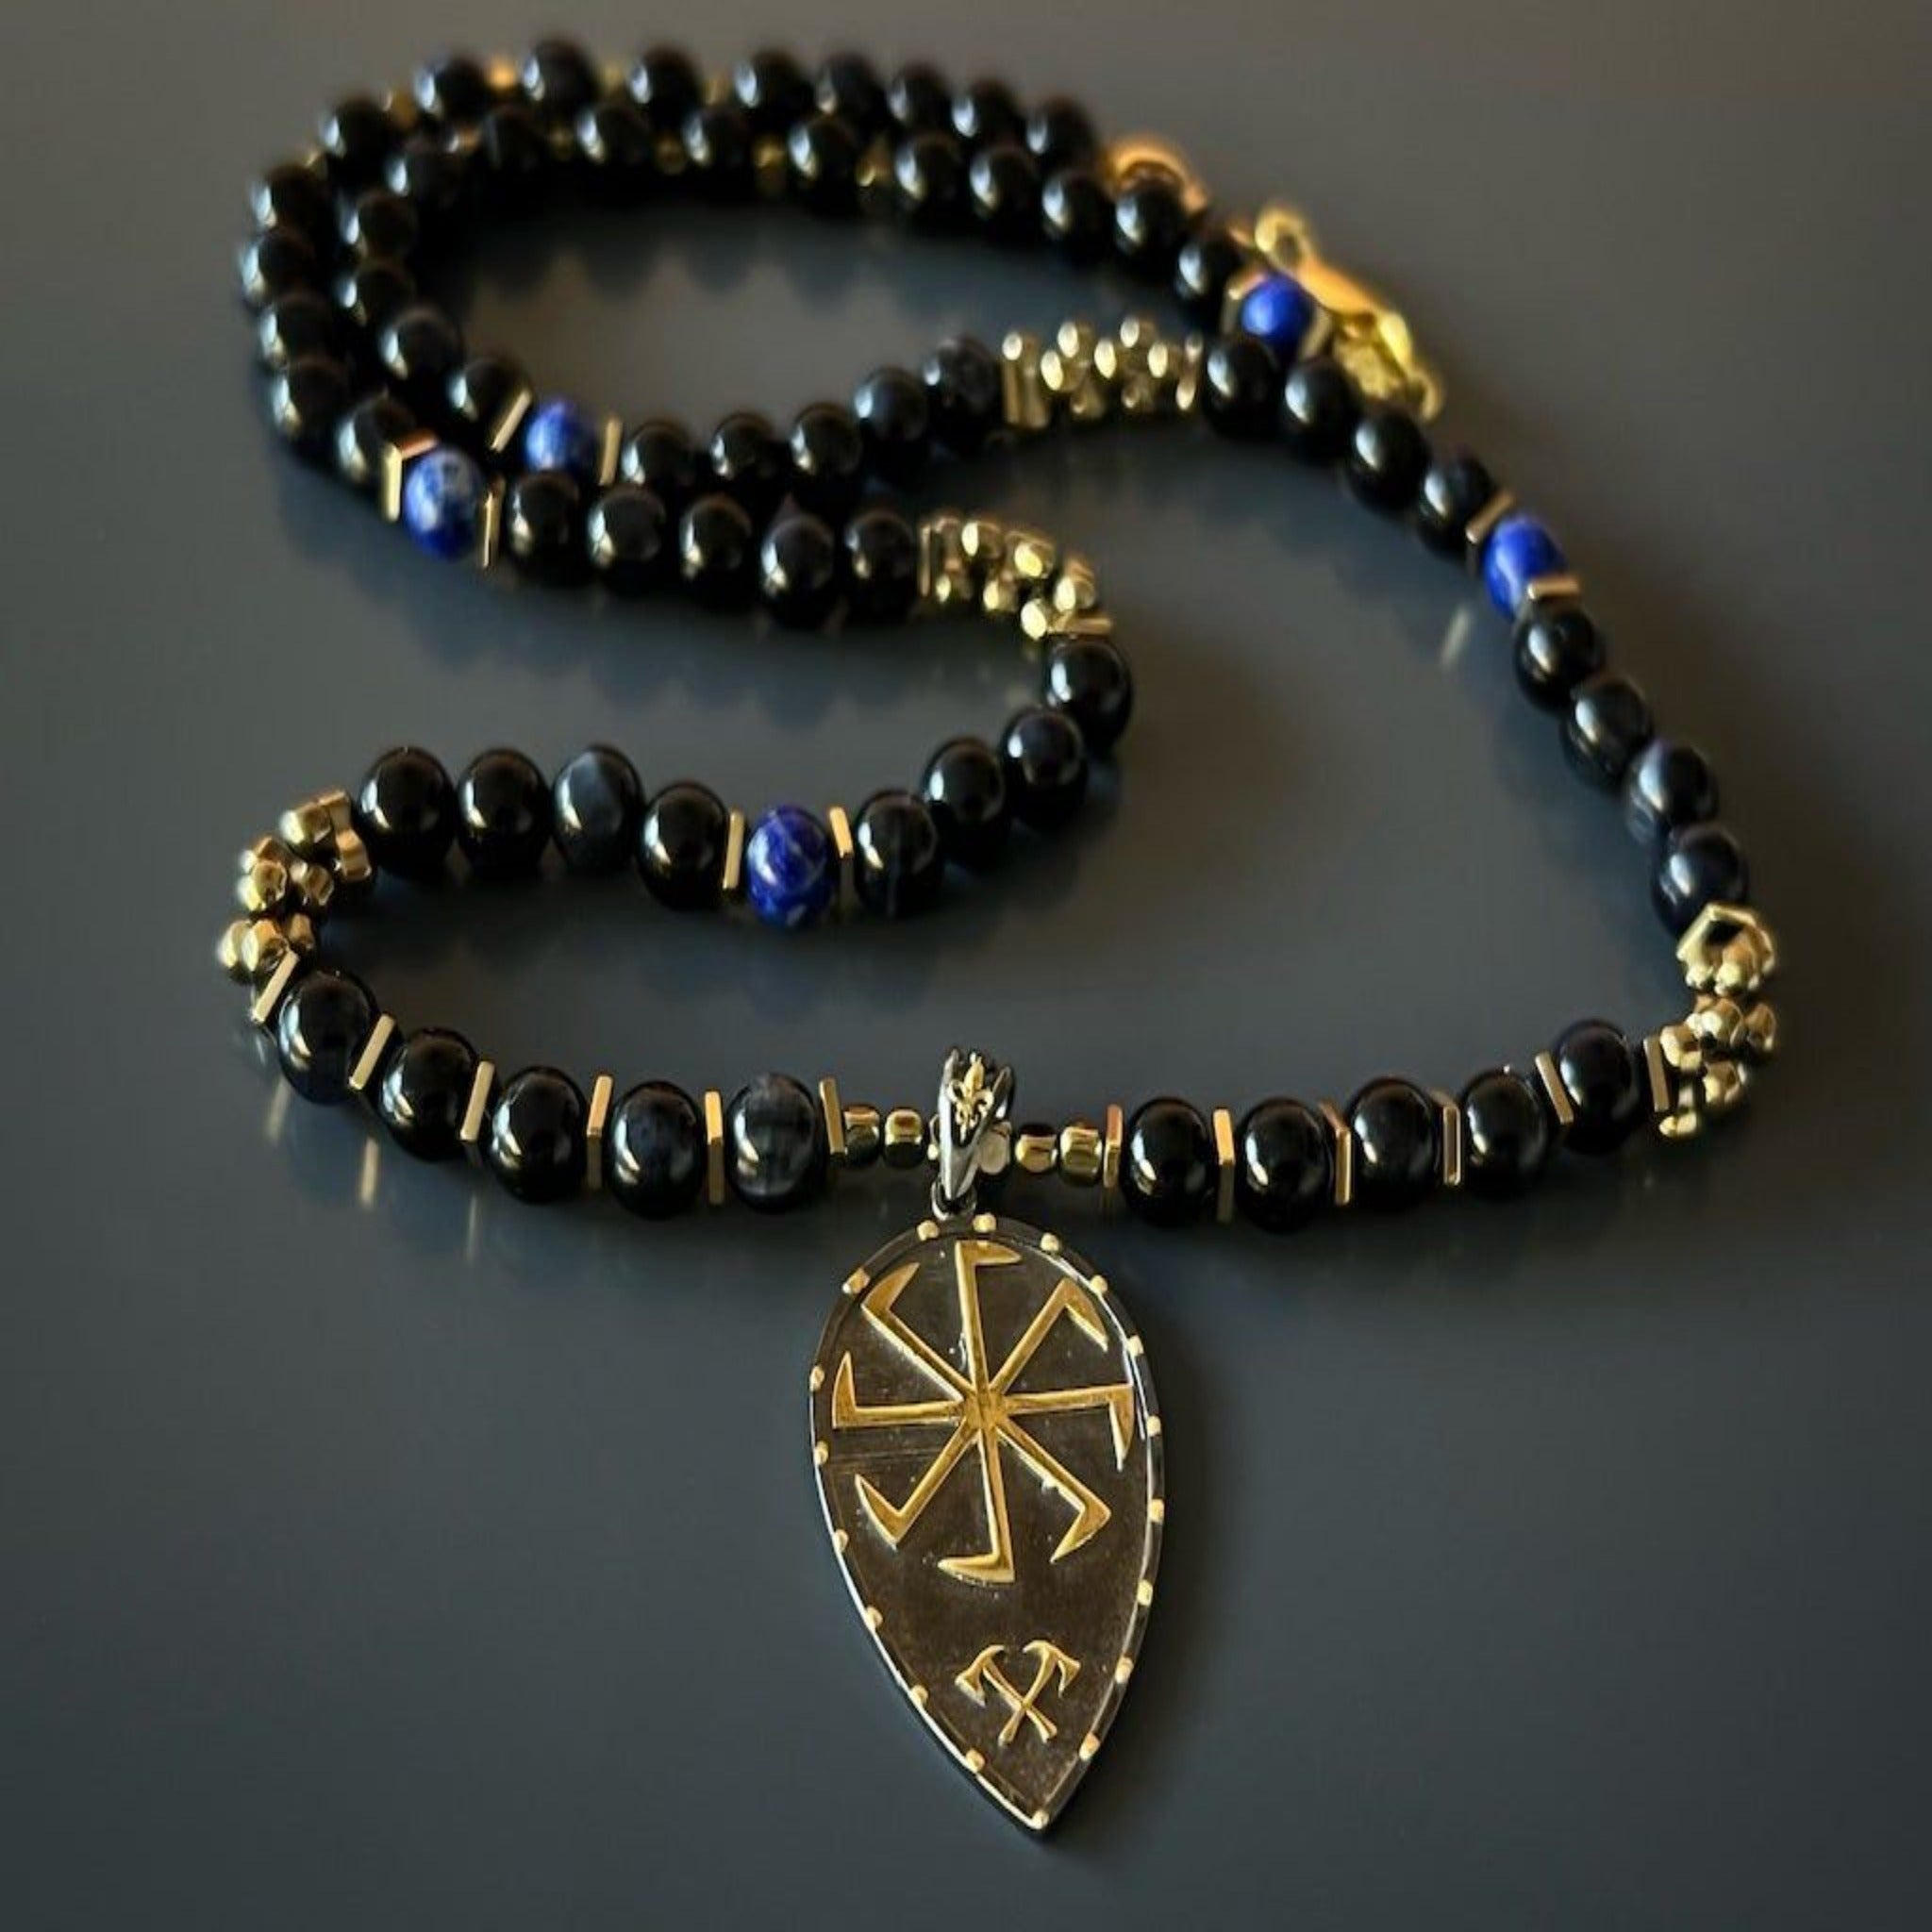 The Kolovrat Sun Cross Necklace displayed, capturing attention with its unique combination of spiritual symbols and natural gemstones.